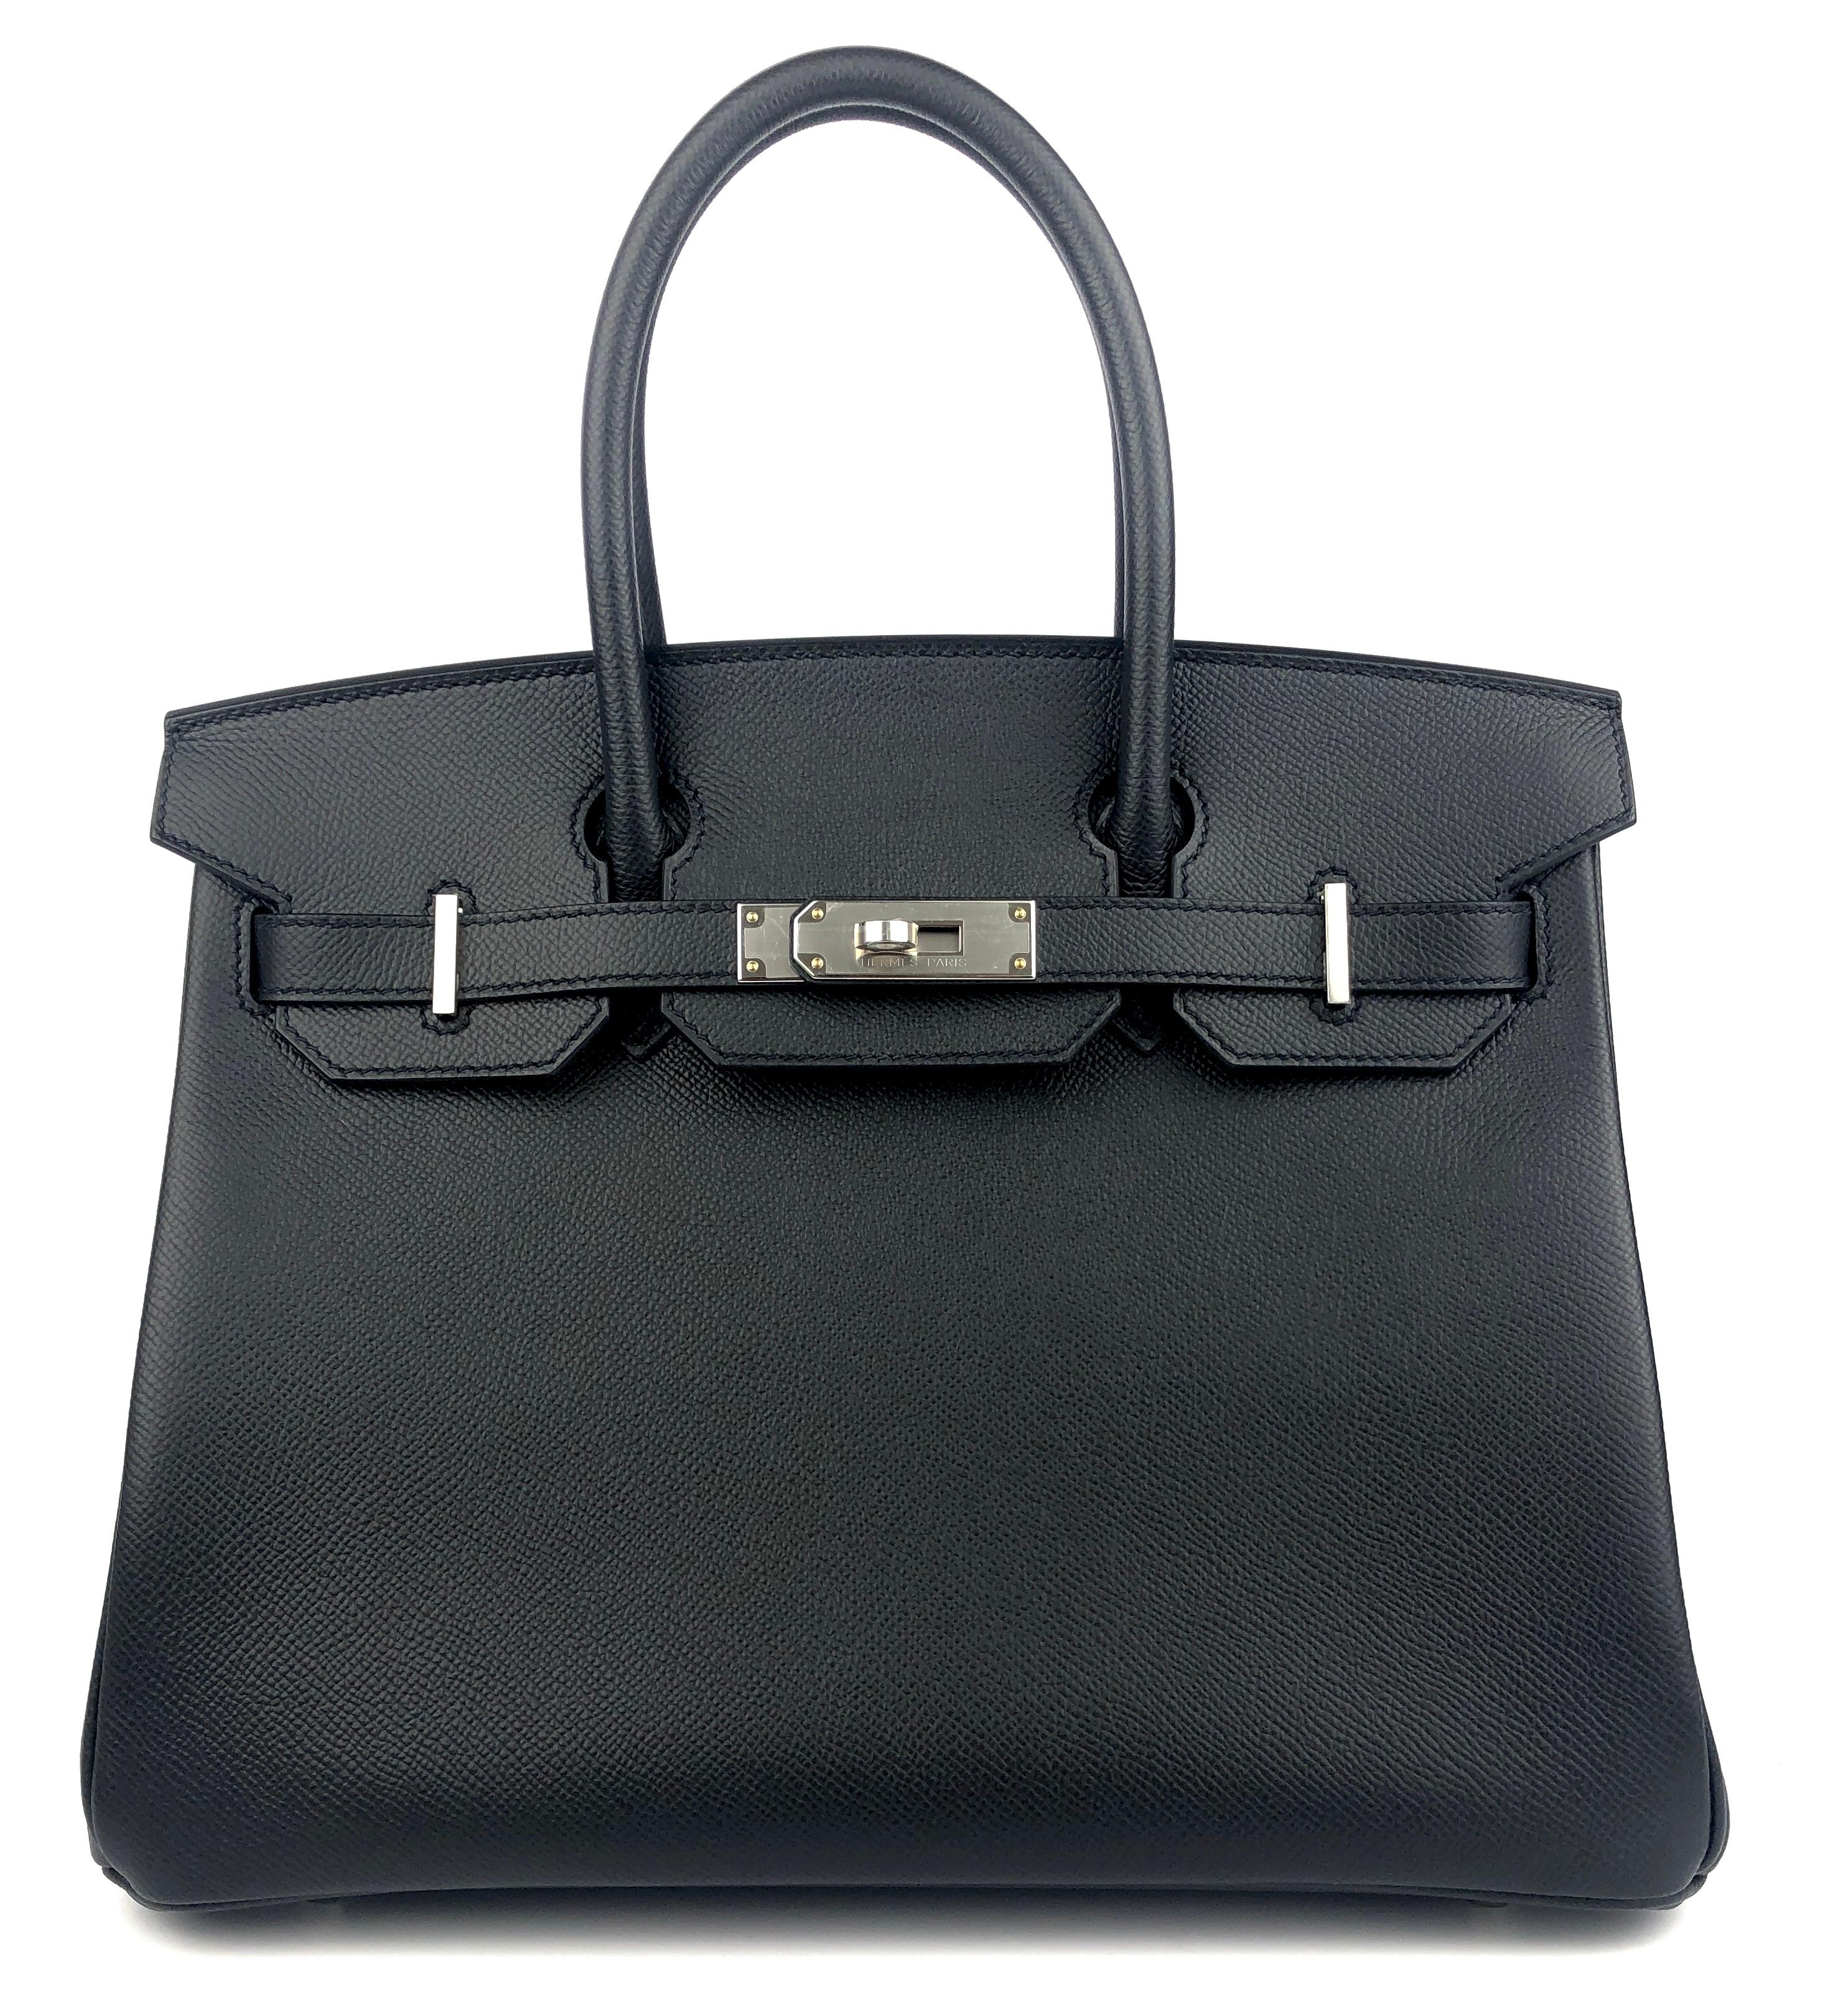 Absolutely Stunning Classic Grail Hermes Birkin 30 Black Epsom Leather complimented by Palladium Hardware. NEW 2021 Z Stamp. Includes all accessories and Box.

Shop with Confidence from Lux Addicts. Authenticity GUARANTEED!